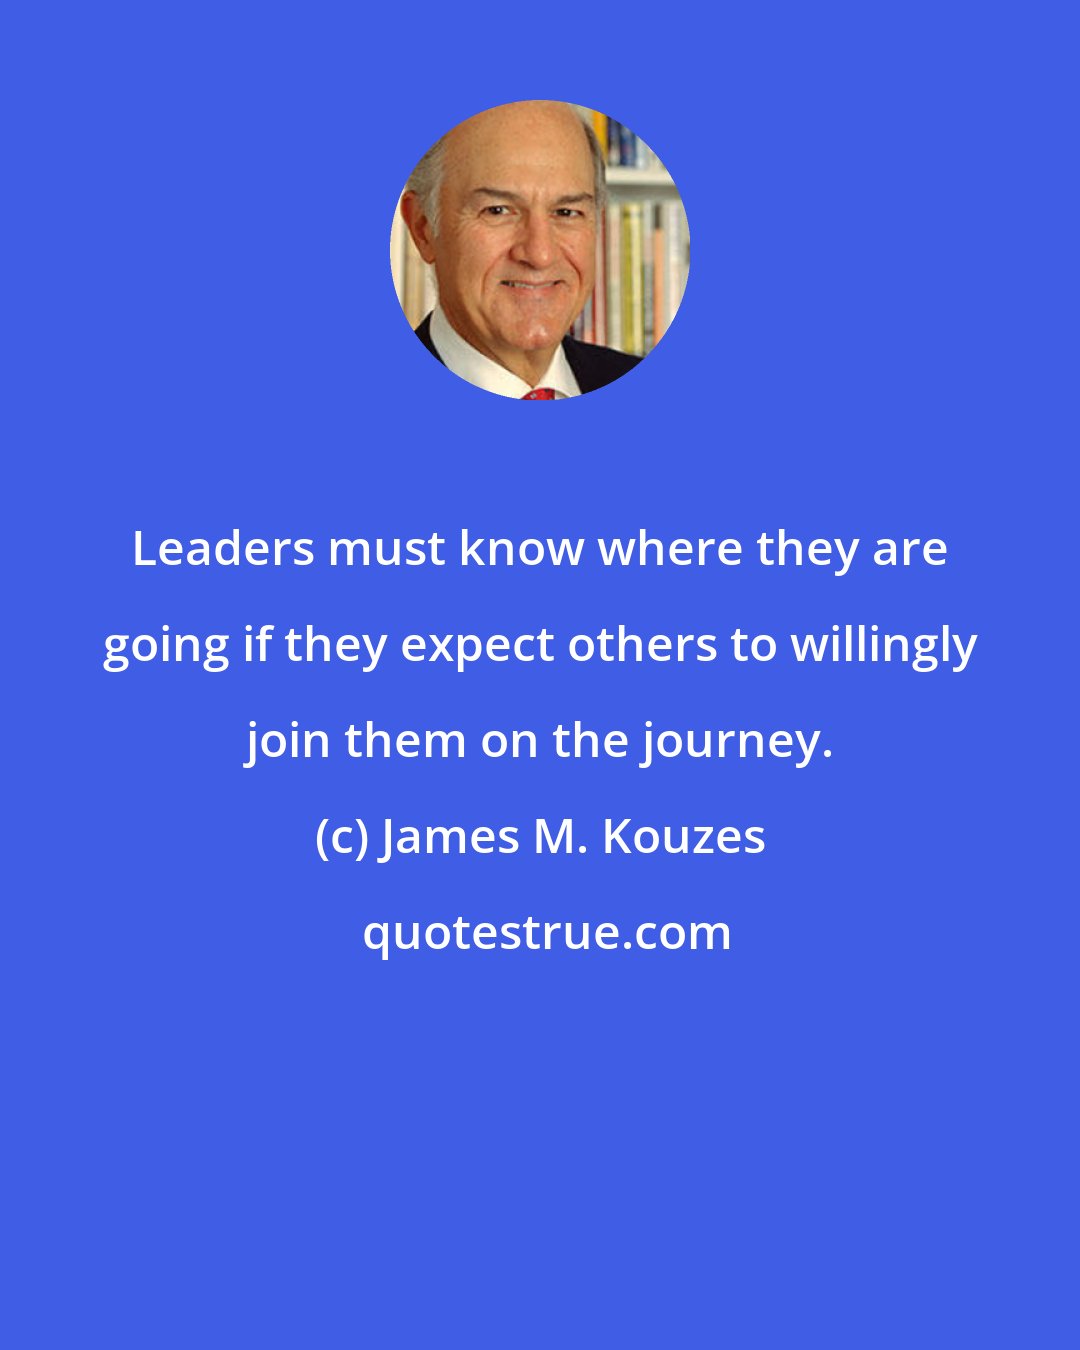 James M. Kouzes: Leaders must know where they are going if they expect others to willingly join them on the journey.